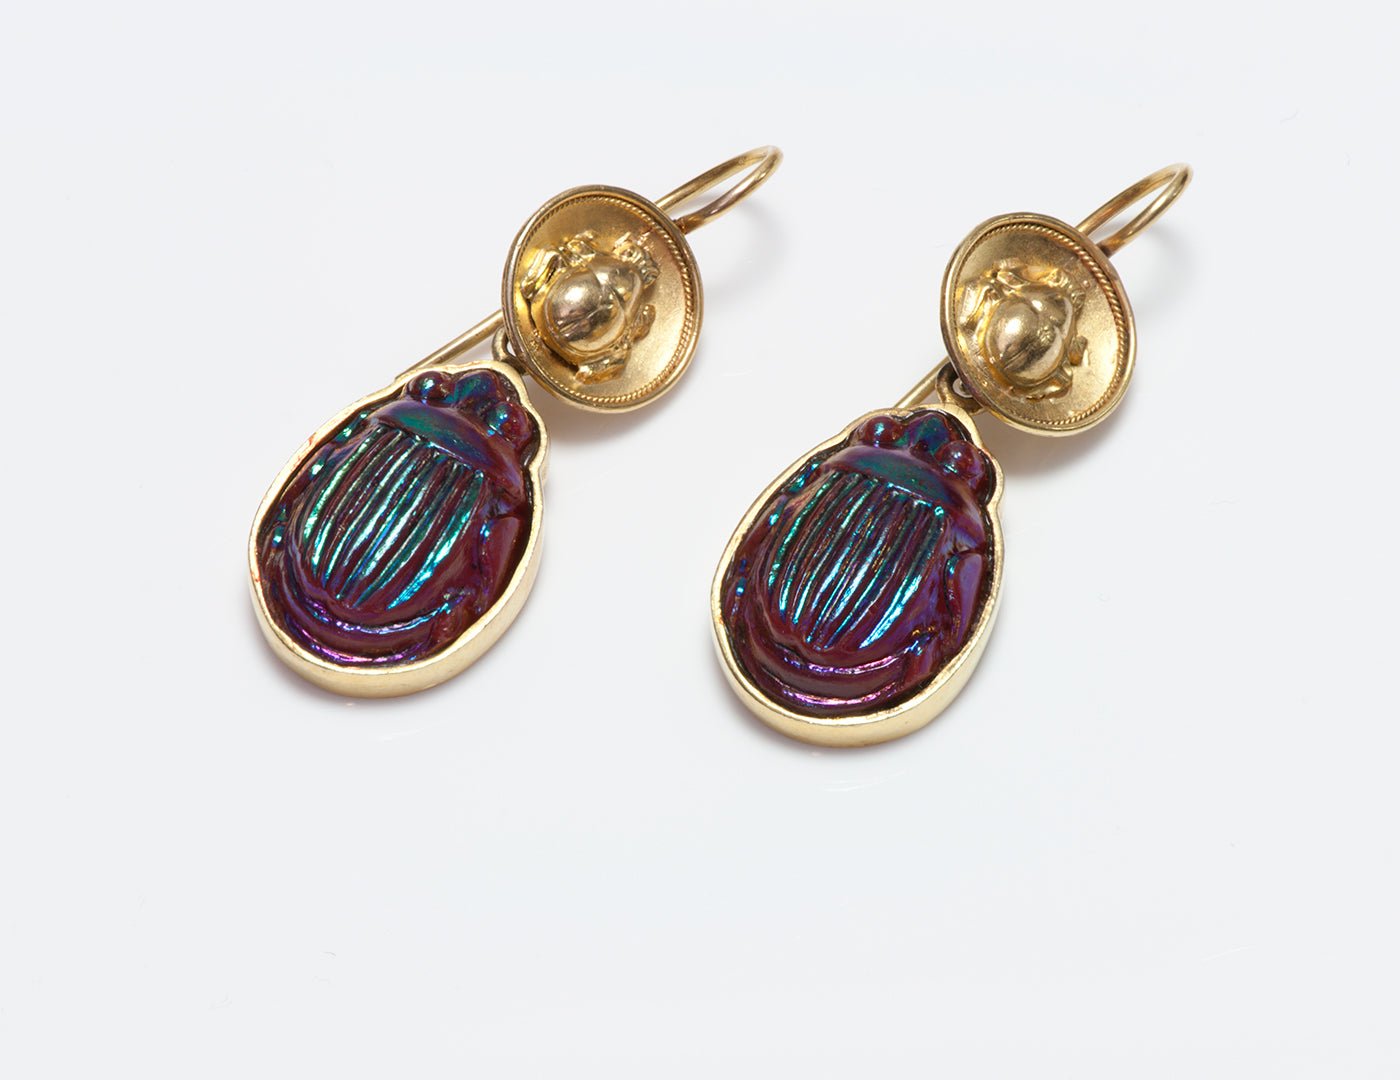 Antique Gold Scarab Earrings with Tiffany Glass Scarabs